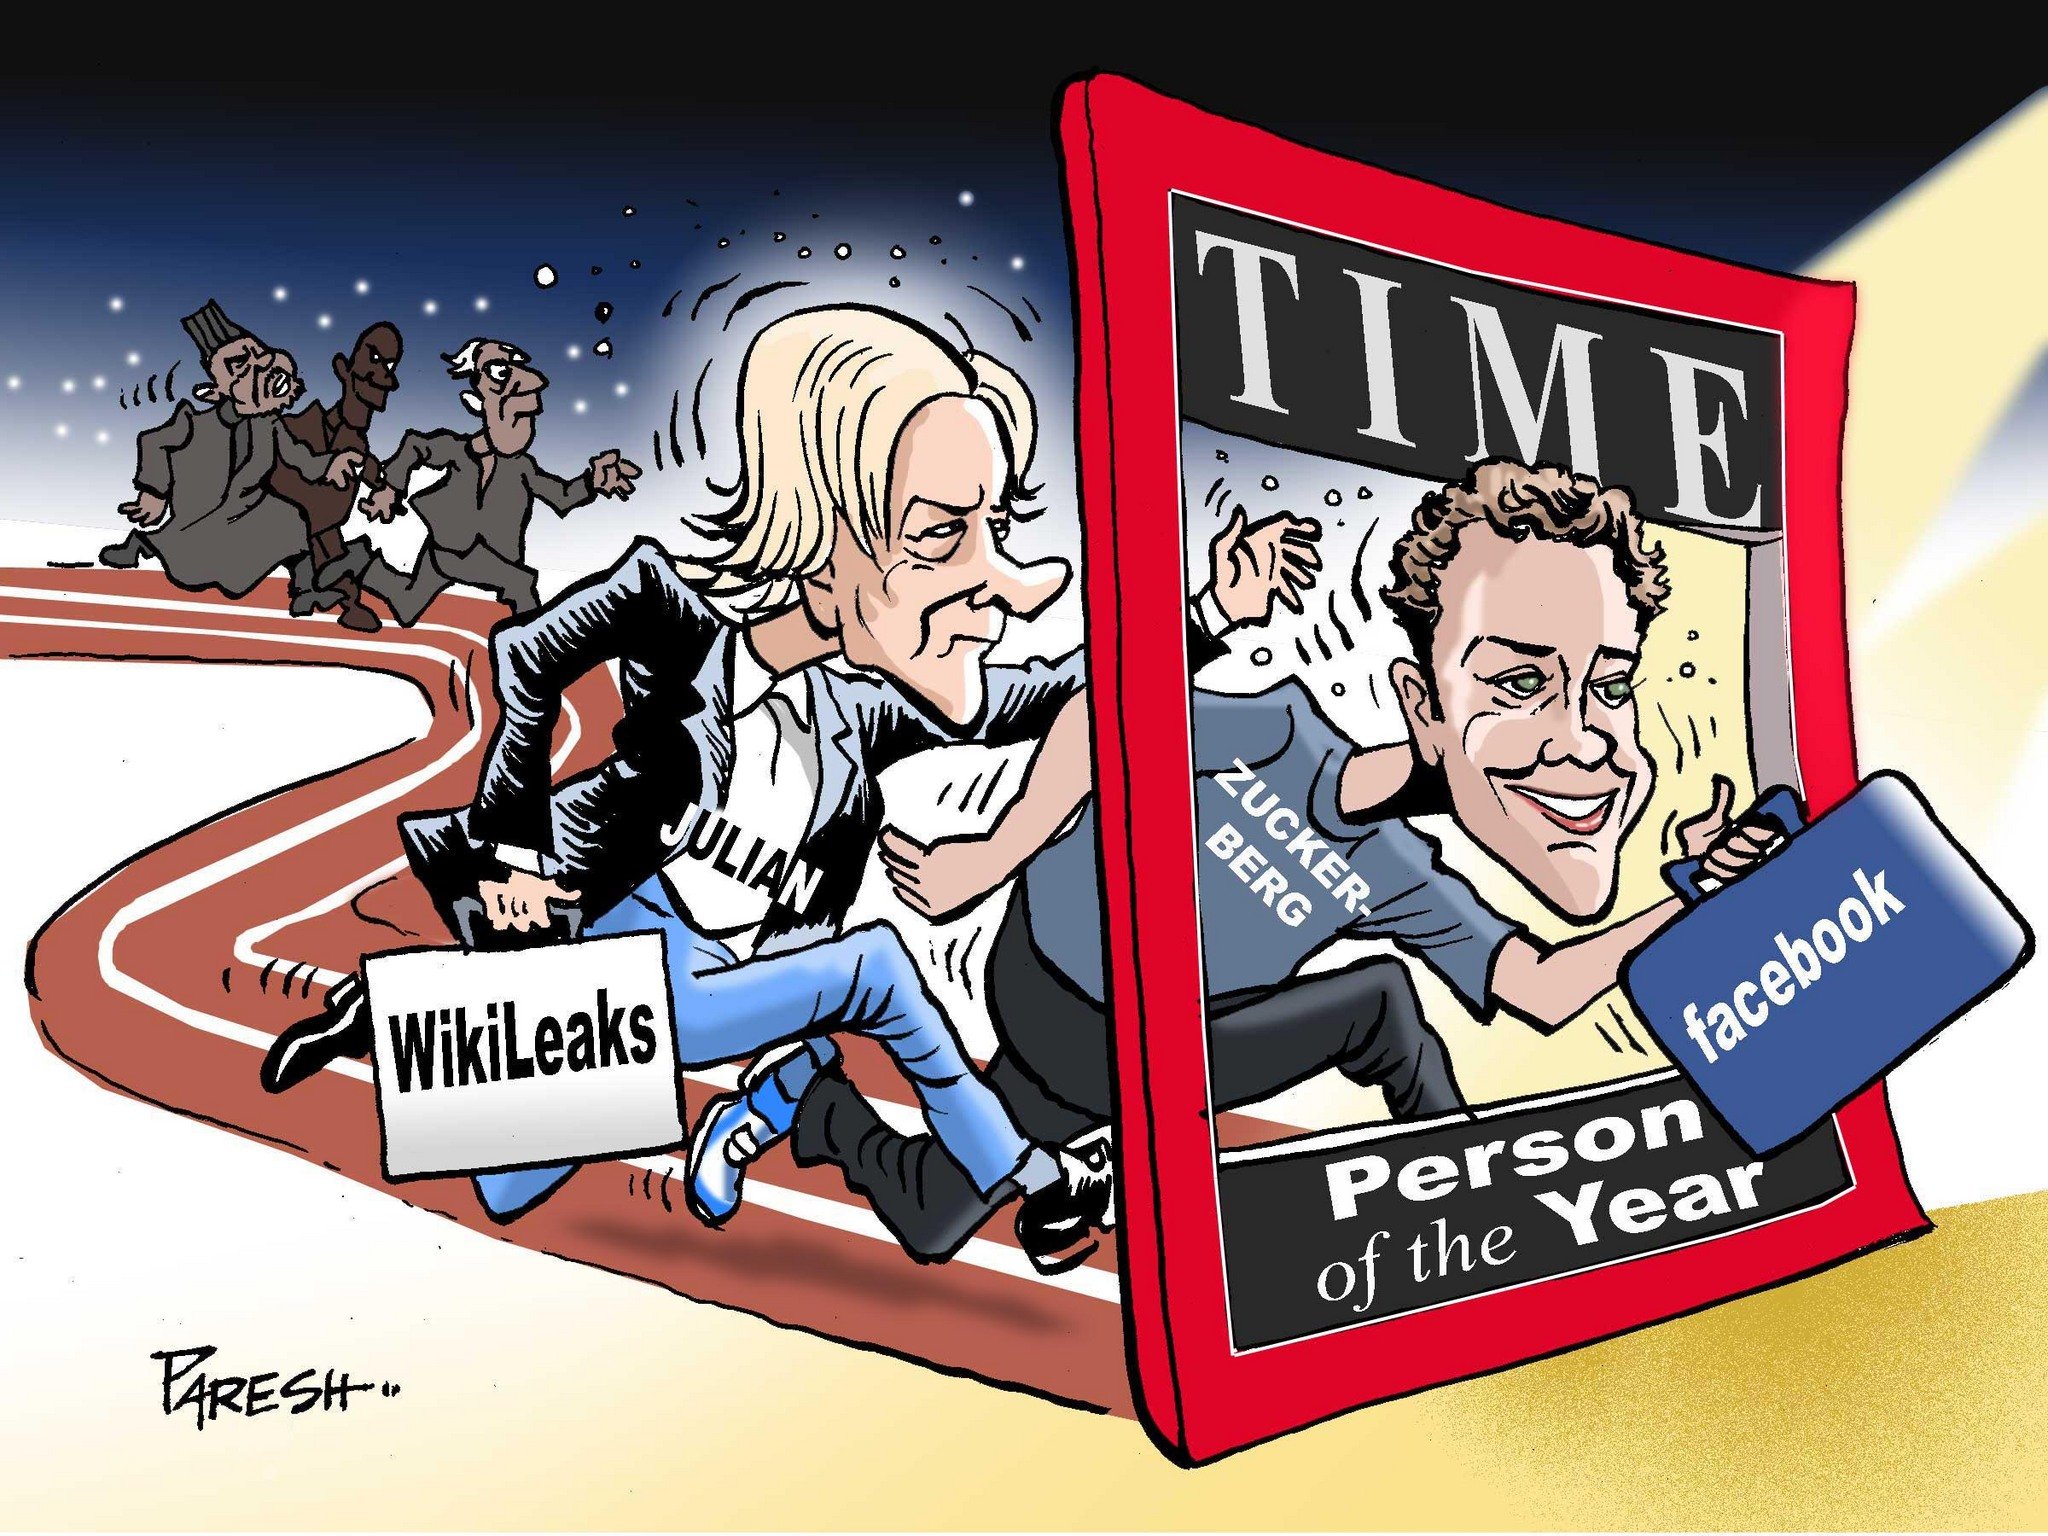 Editorial cartoons Our Man of the Year, Julian Assange, ruins